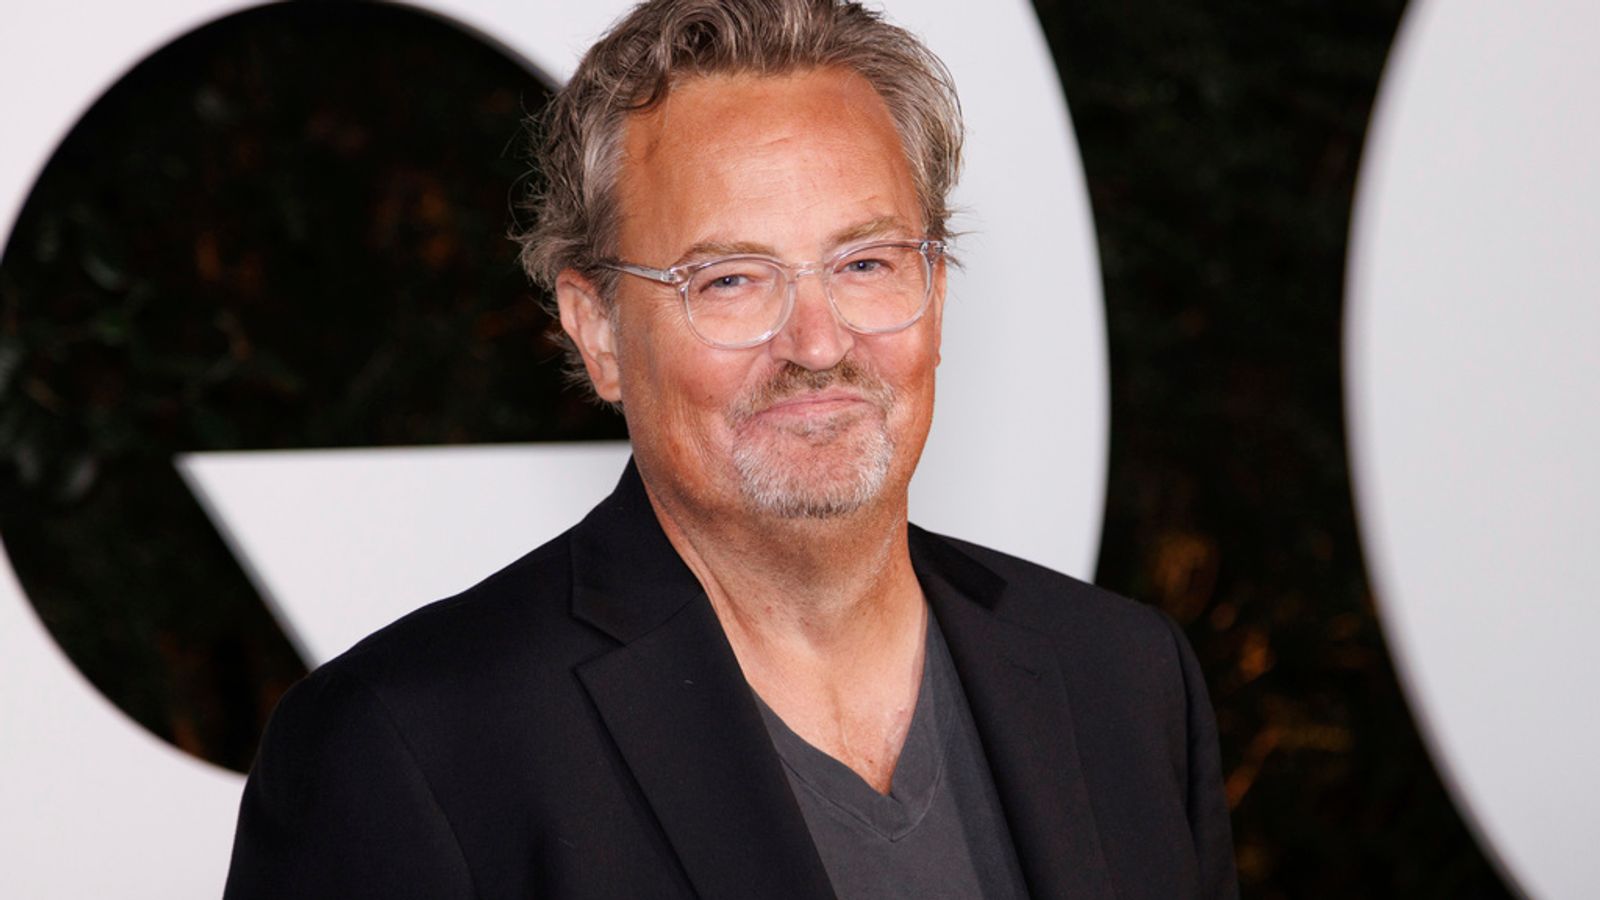 Matthew Perry 'happy and chipper' before death, Friends creators say